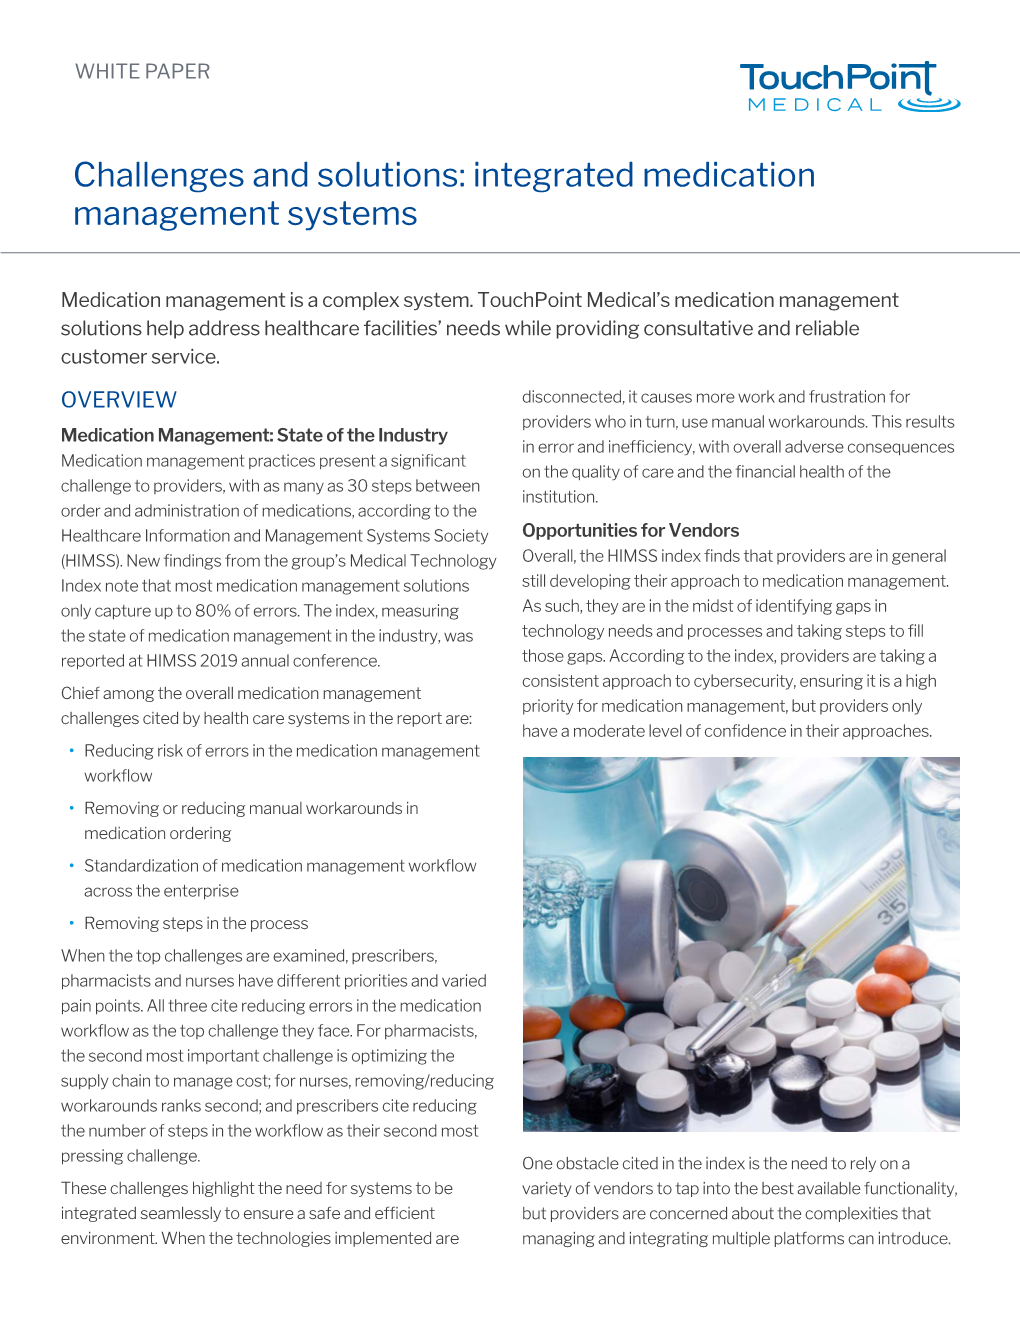 Integrated Medication Management Systems